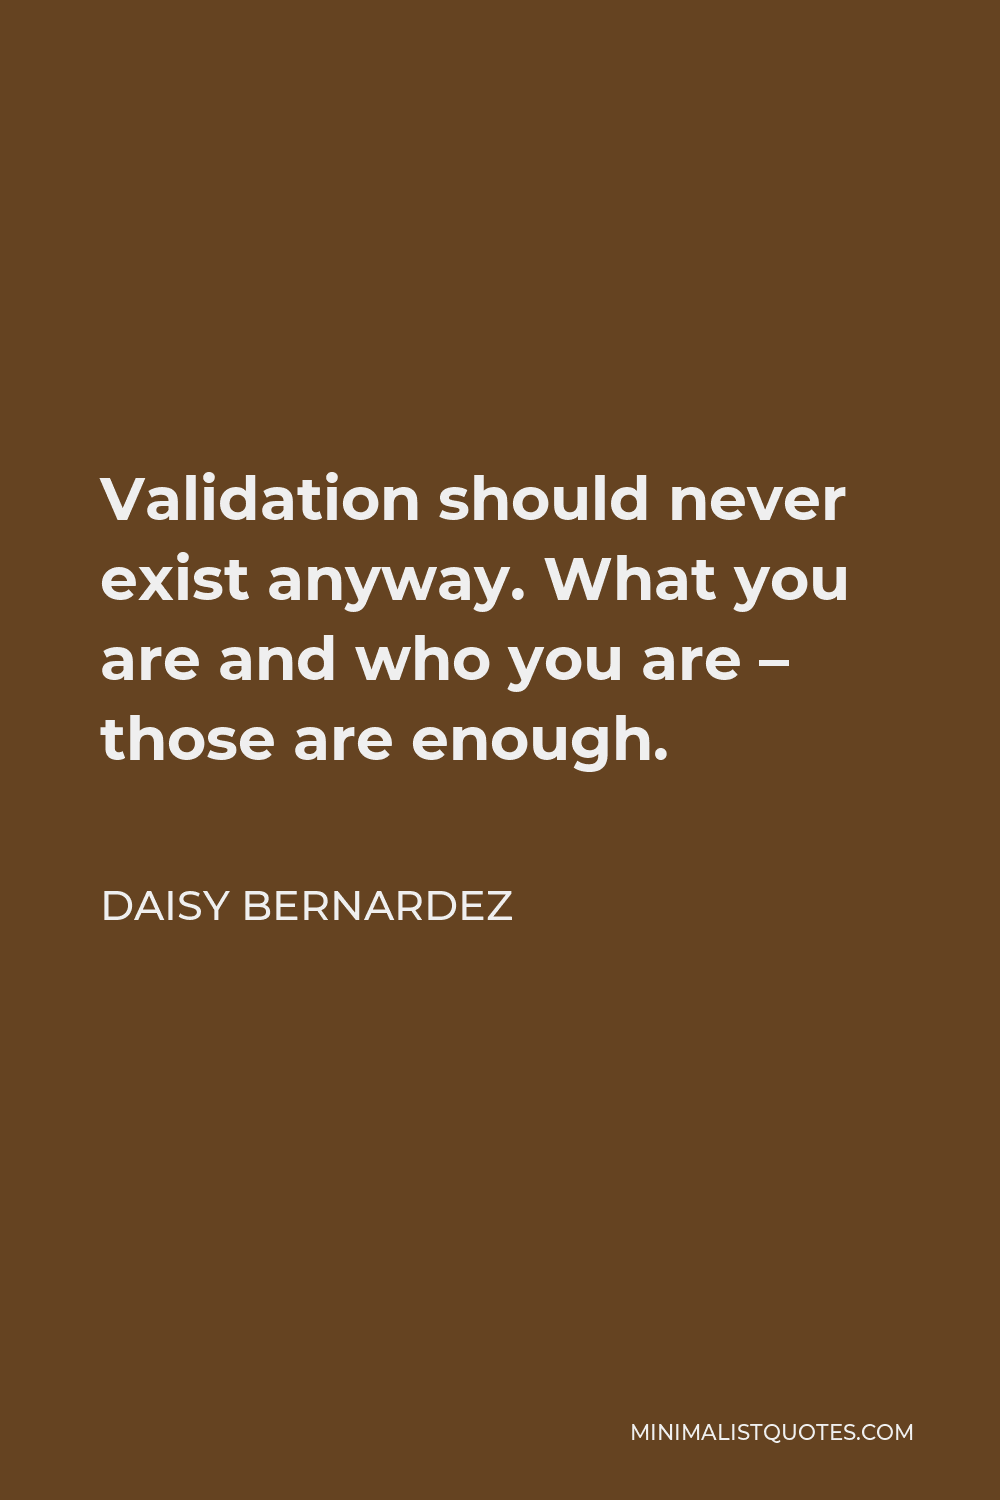 Daisy Bernardez Quote - Validation should never exist anyway. What you are and who you are – those are enough.